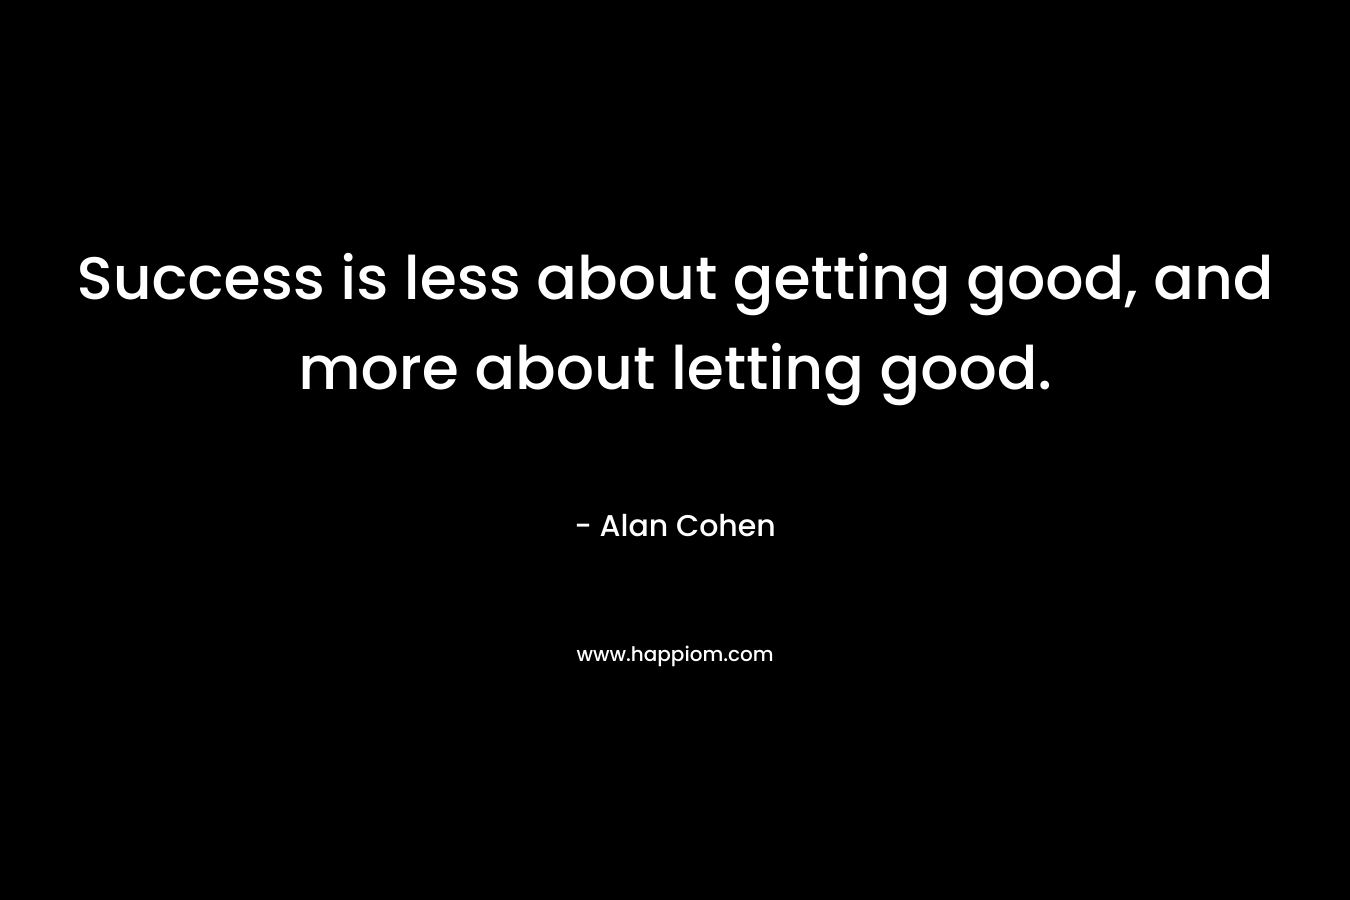 Success is less about getting good, and more about letting good. – Alan Cohen